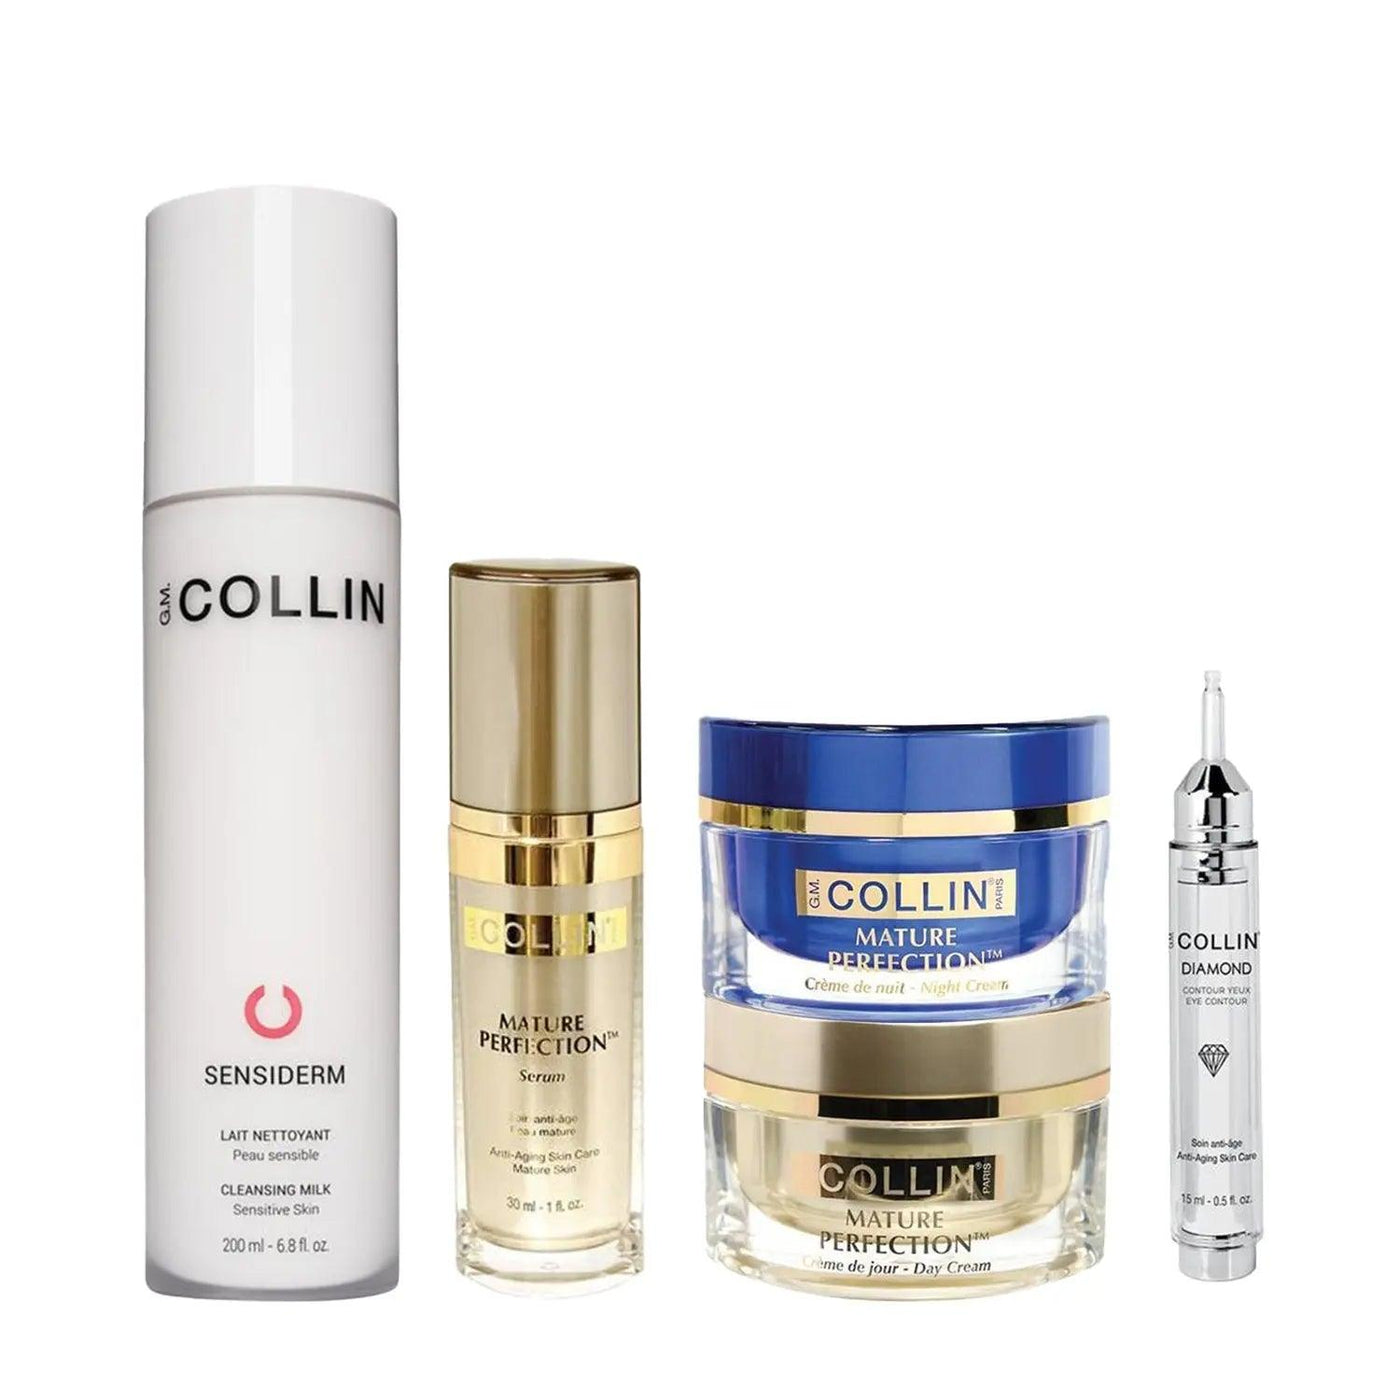 LIFTING & SMOOTHING BUNDLE FOR NORMAL / COMBO SKIN (50+) G.M Collin Boutique Deauville